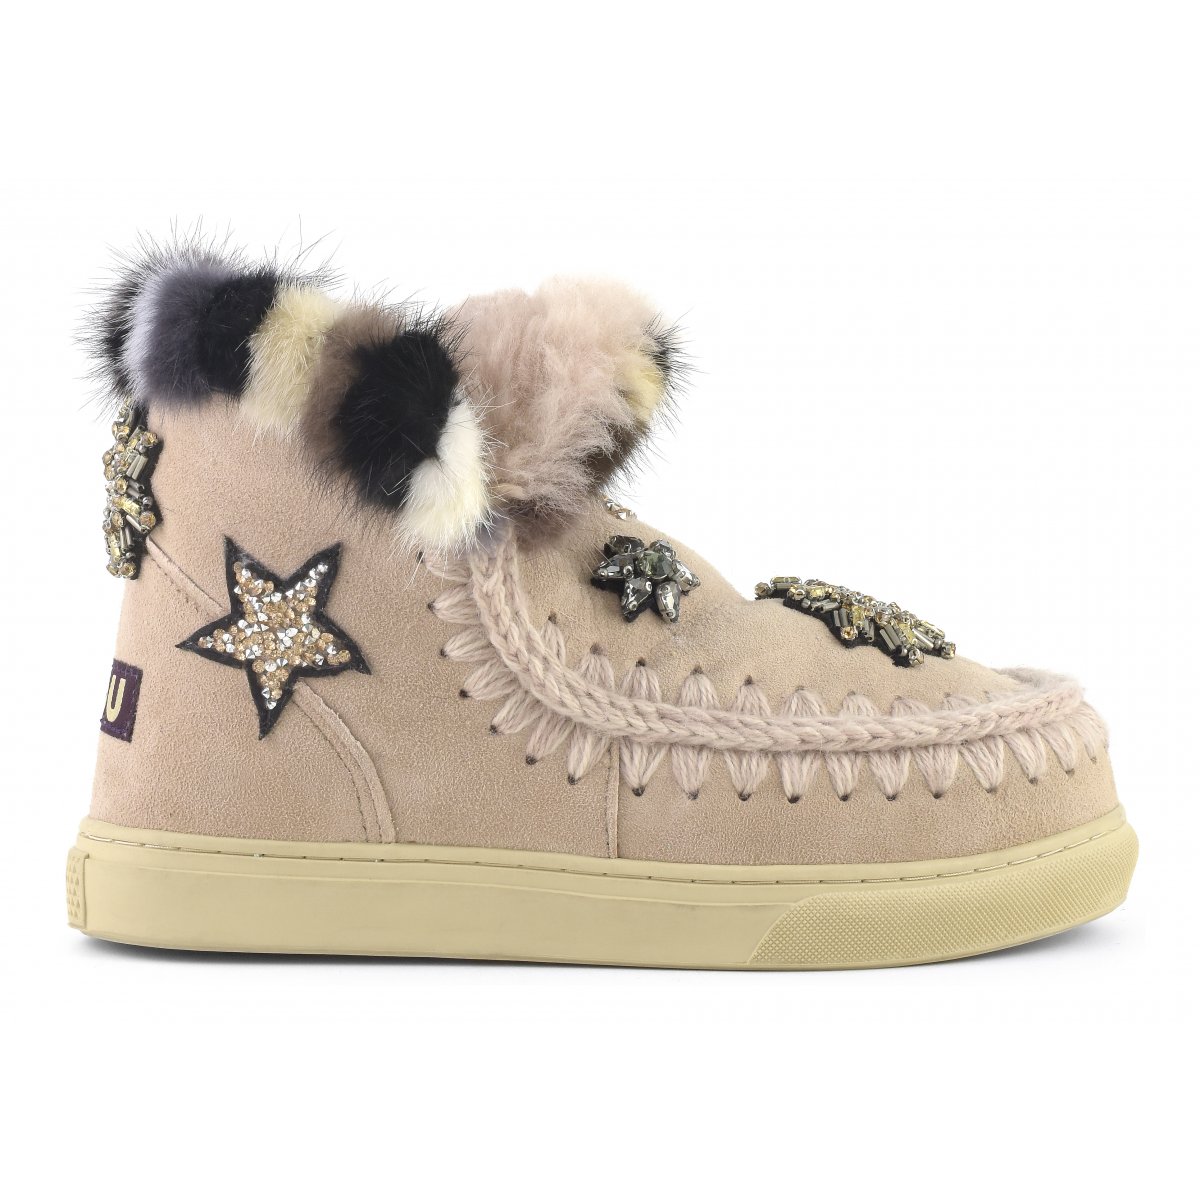 sneakers with fur trim